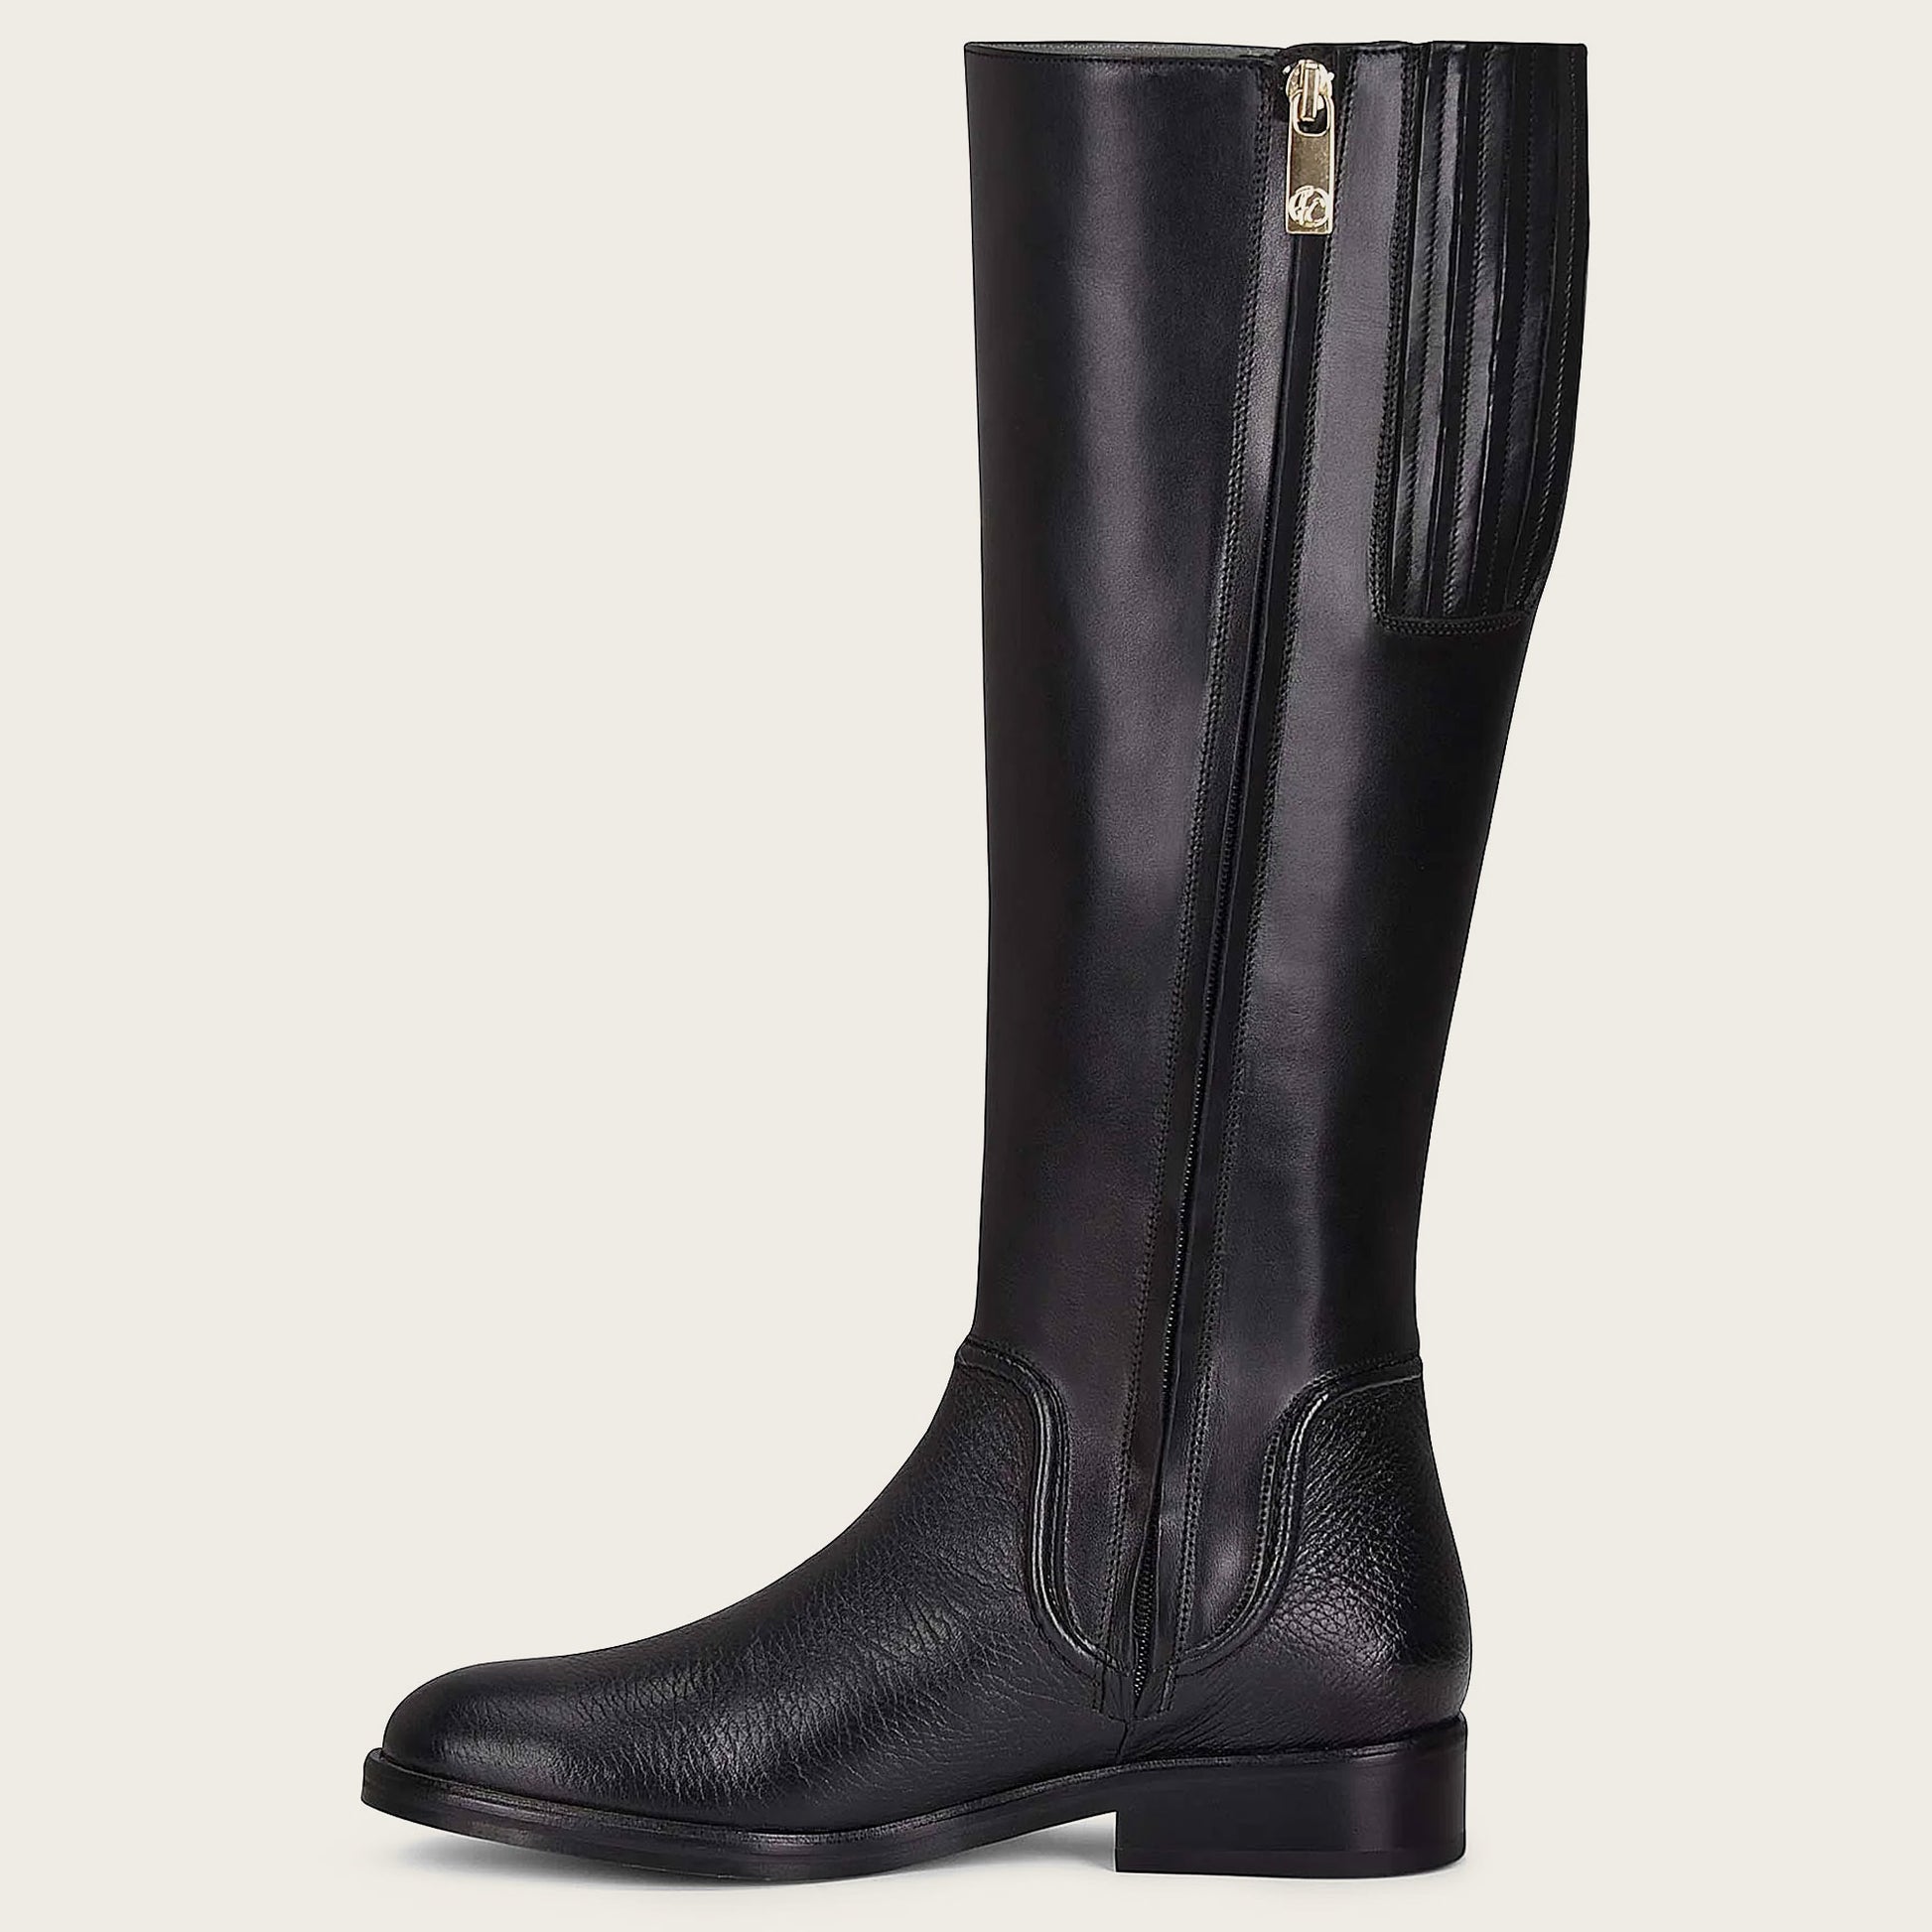 these riding boots feature an inner zipper. Therefore, allows an easy adjustment and makes sure a snug fit.